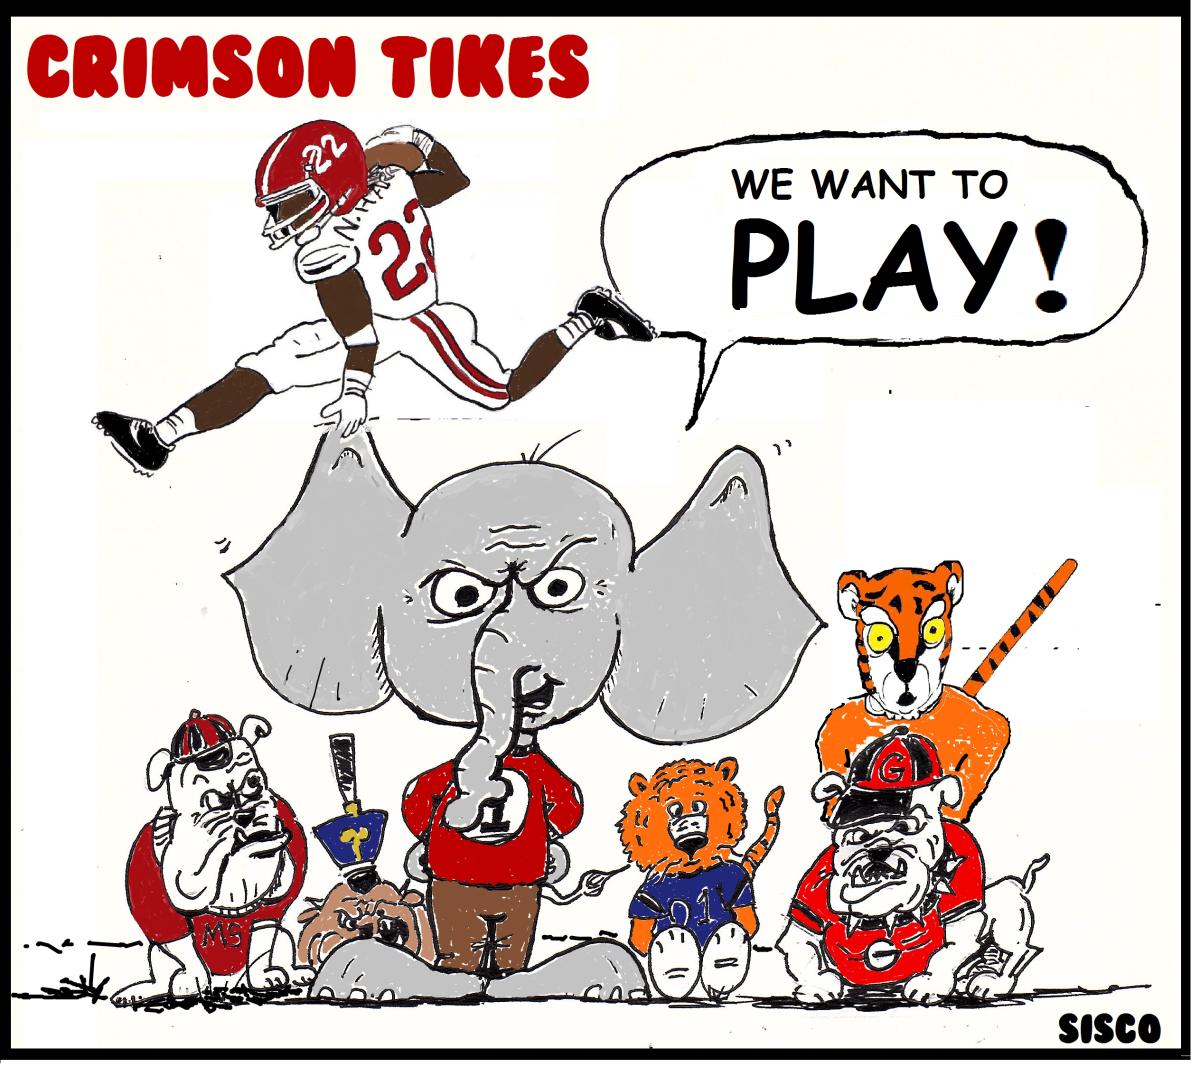 Crimson Tikes: We Want to Play